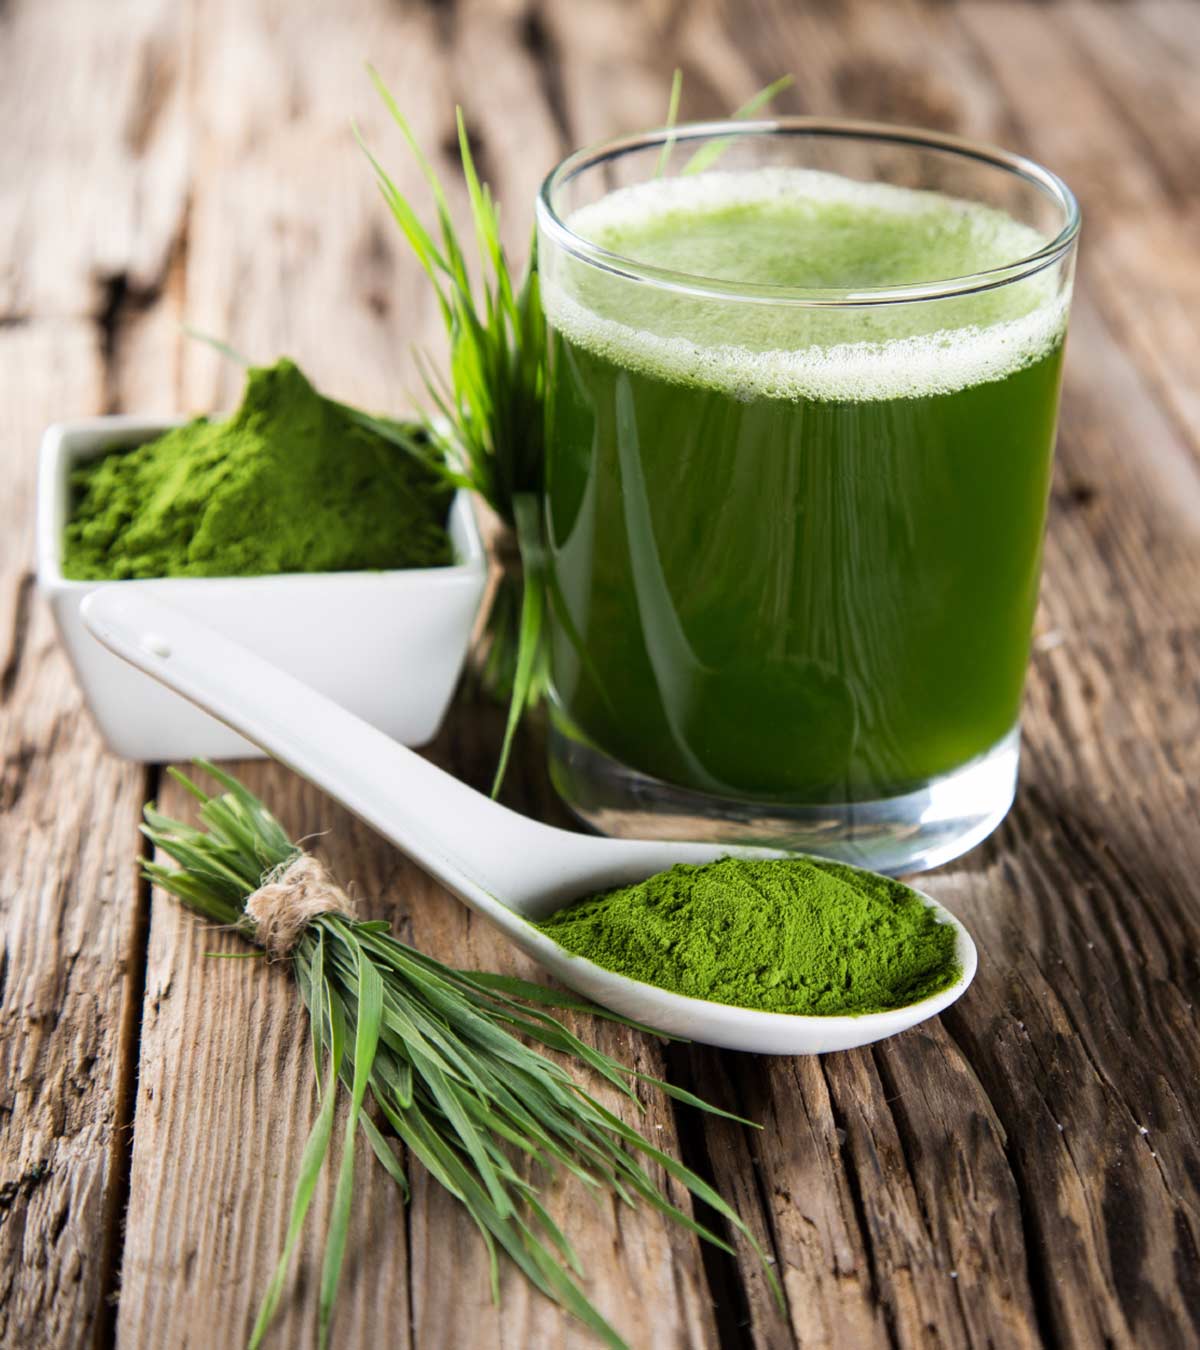 Is Spirulina Safe To Consume During Breastfeeding?